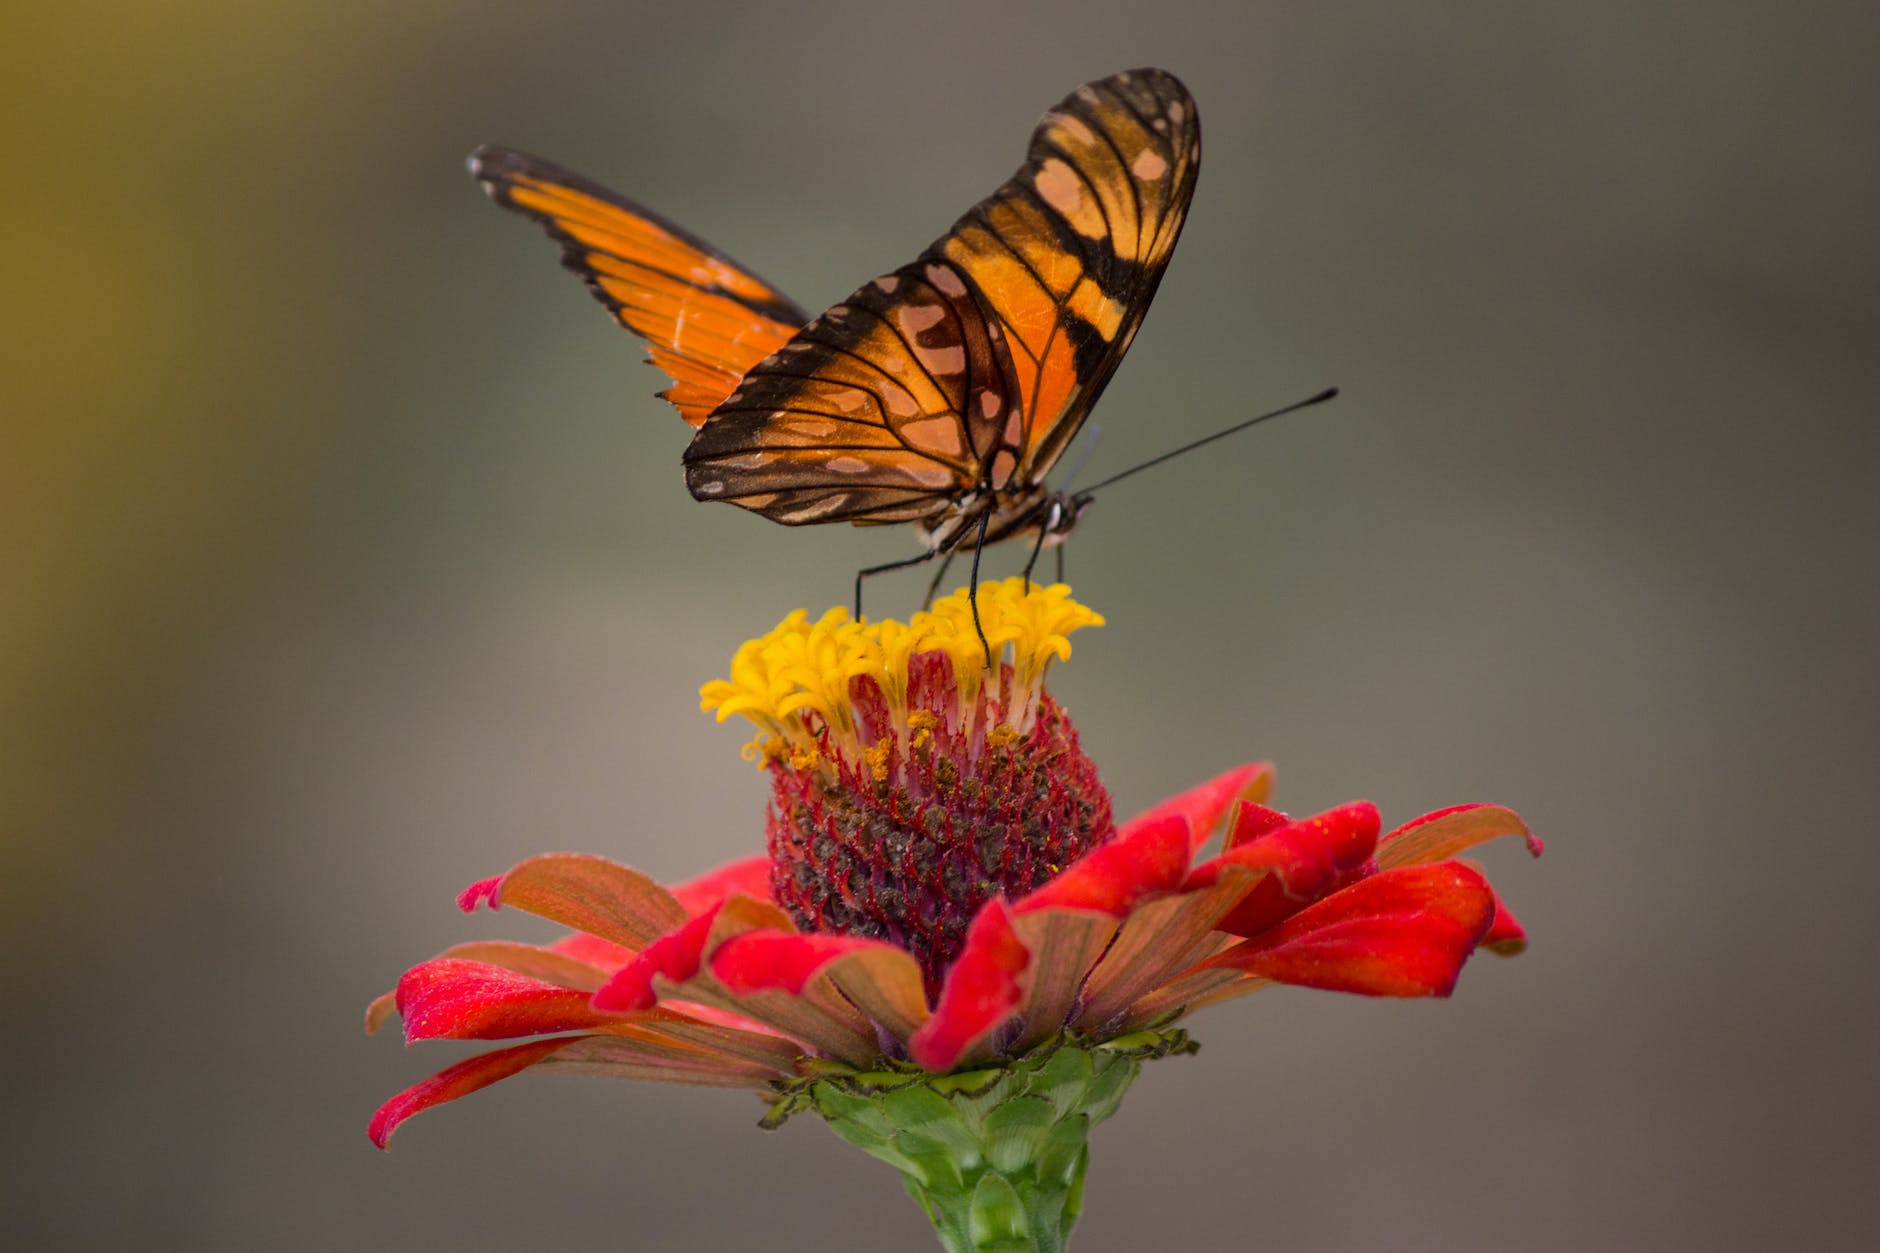 brown and black butterfly perched on yellow and red petaled flower closeup photography